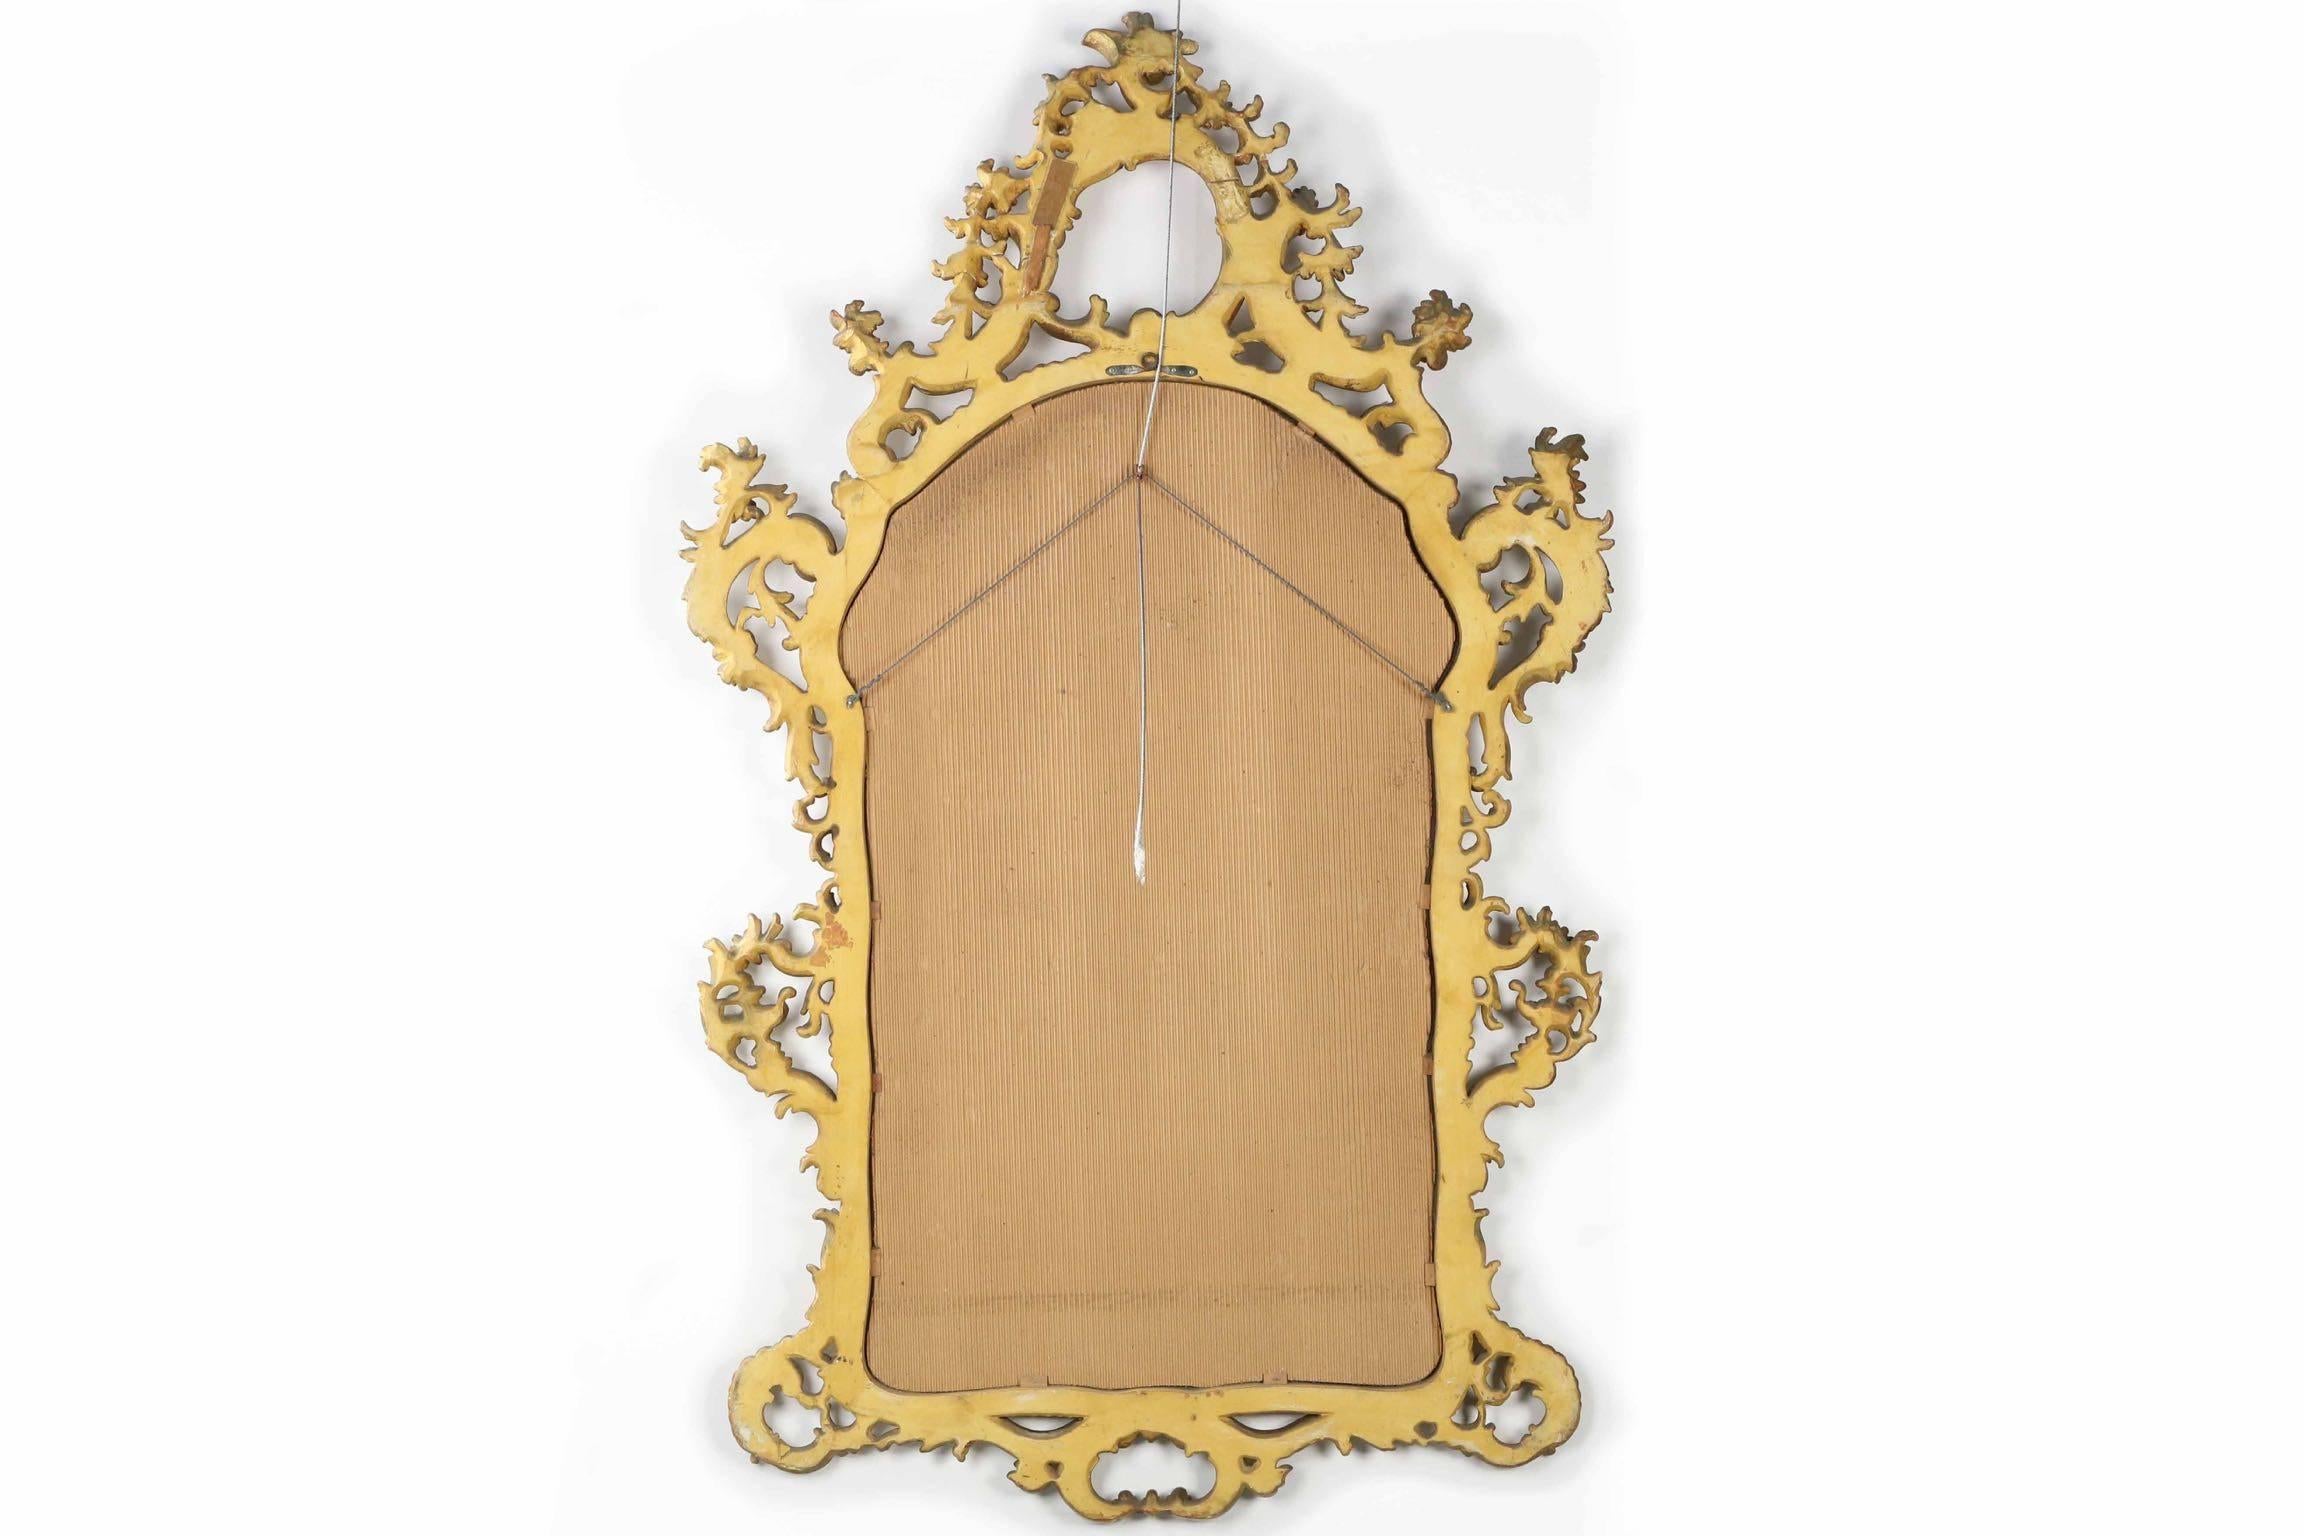 A profusely carved and very finely detailed mirror executed faithfully in the Louis XV taste, the gorgeous handwork was finished with a red bole and then gilded. Probably crafted during the first quarter of the 20th century, the surface has